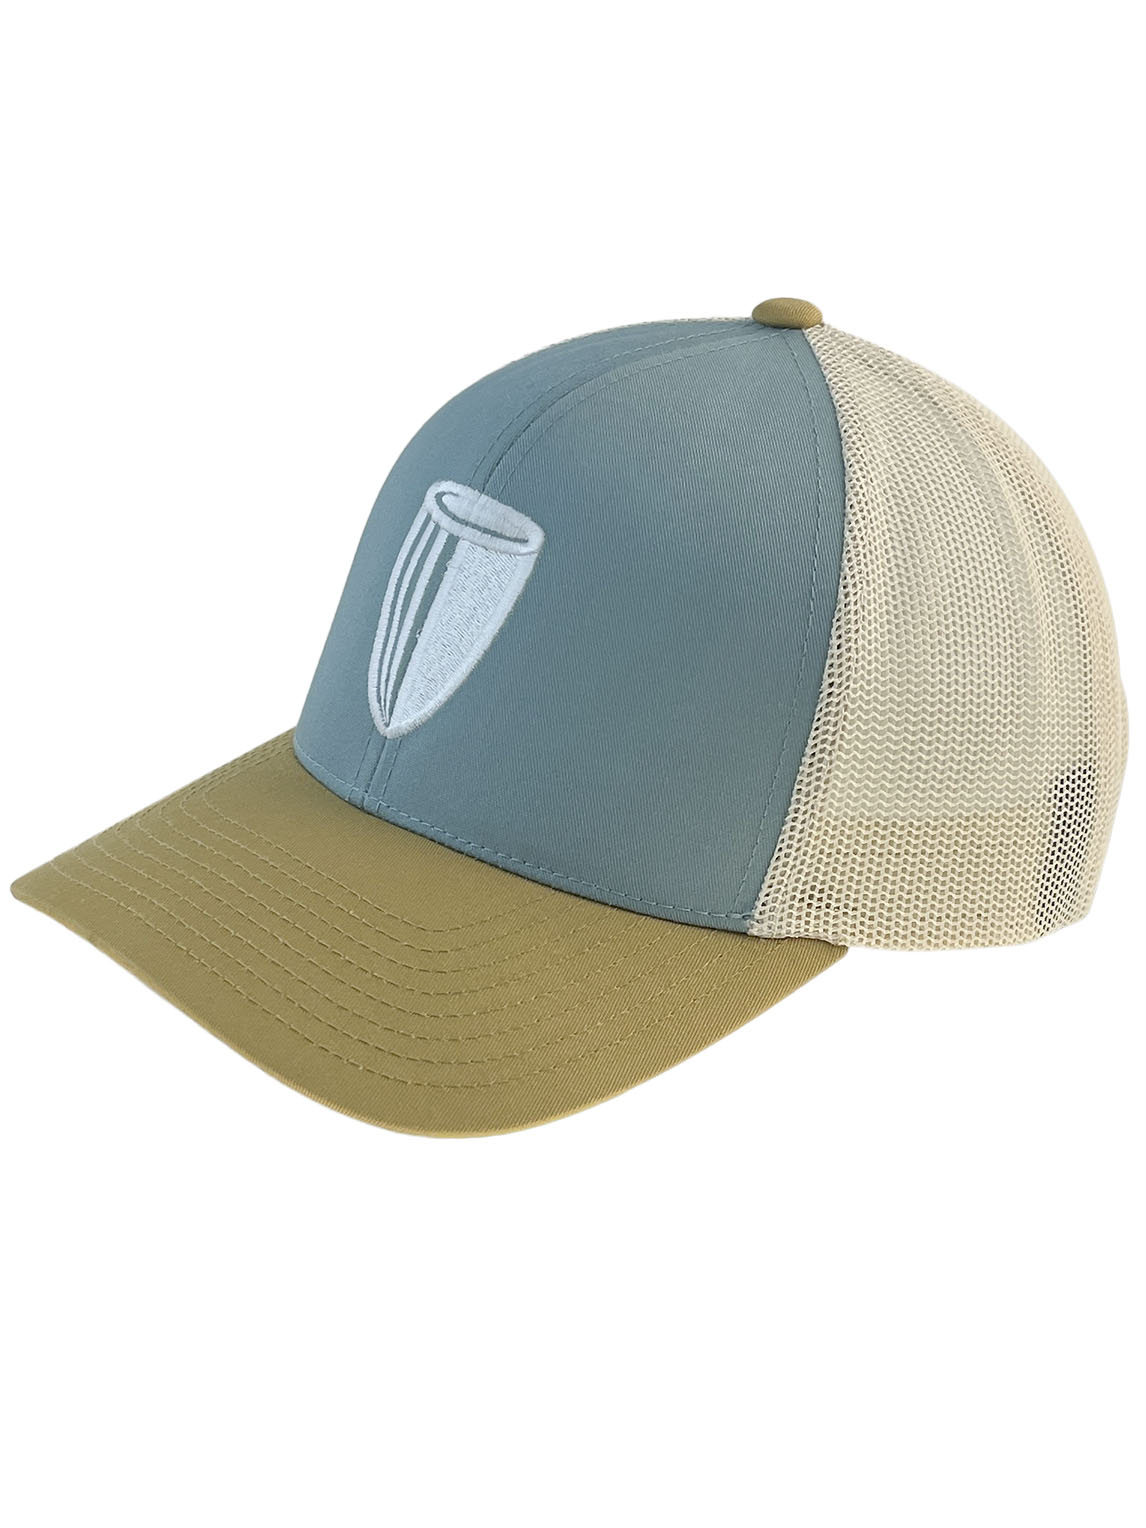 dga-embroidered-icon-hat-smoke-blue-beige-amber-gold